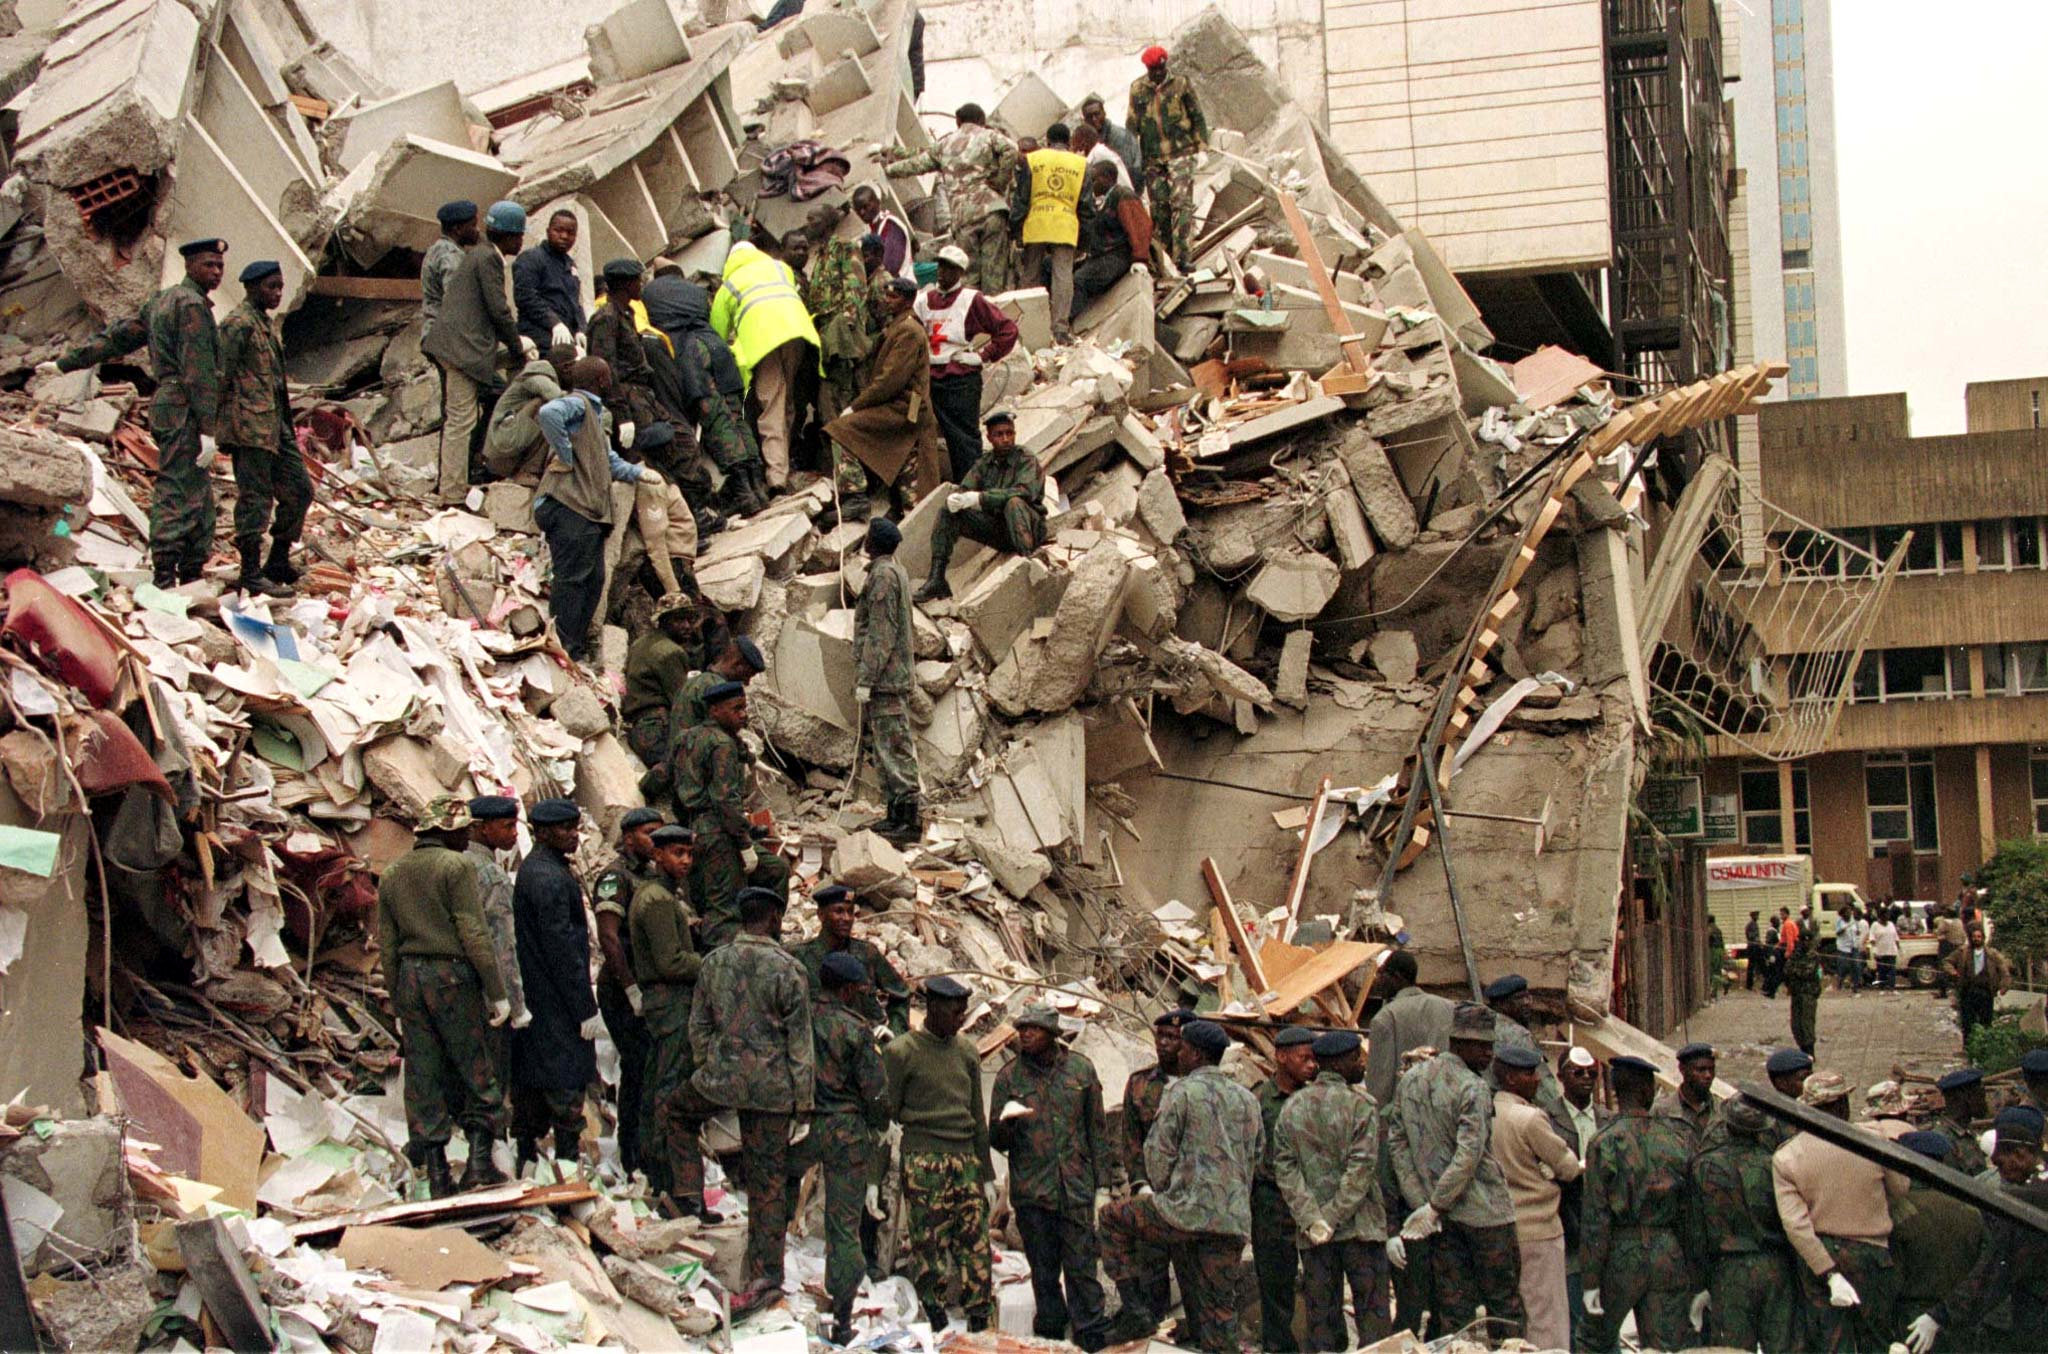 FILE PHOTO: Rescue workers sift through rubble and slabs of concrete in an attempt to find survivers at the site of the bombing of the U.S. Embassy building in Nairobi, Kenya. August 7, 1998. Picture taken August 7, 1998. REUTERS/Corinne Dufka/File photo